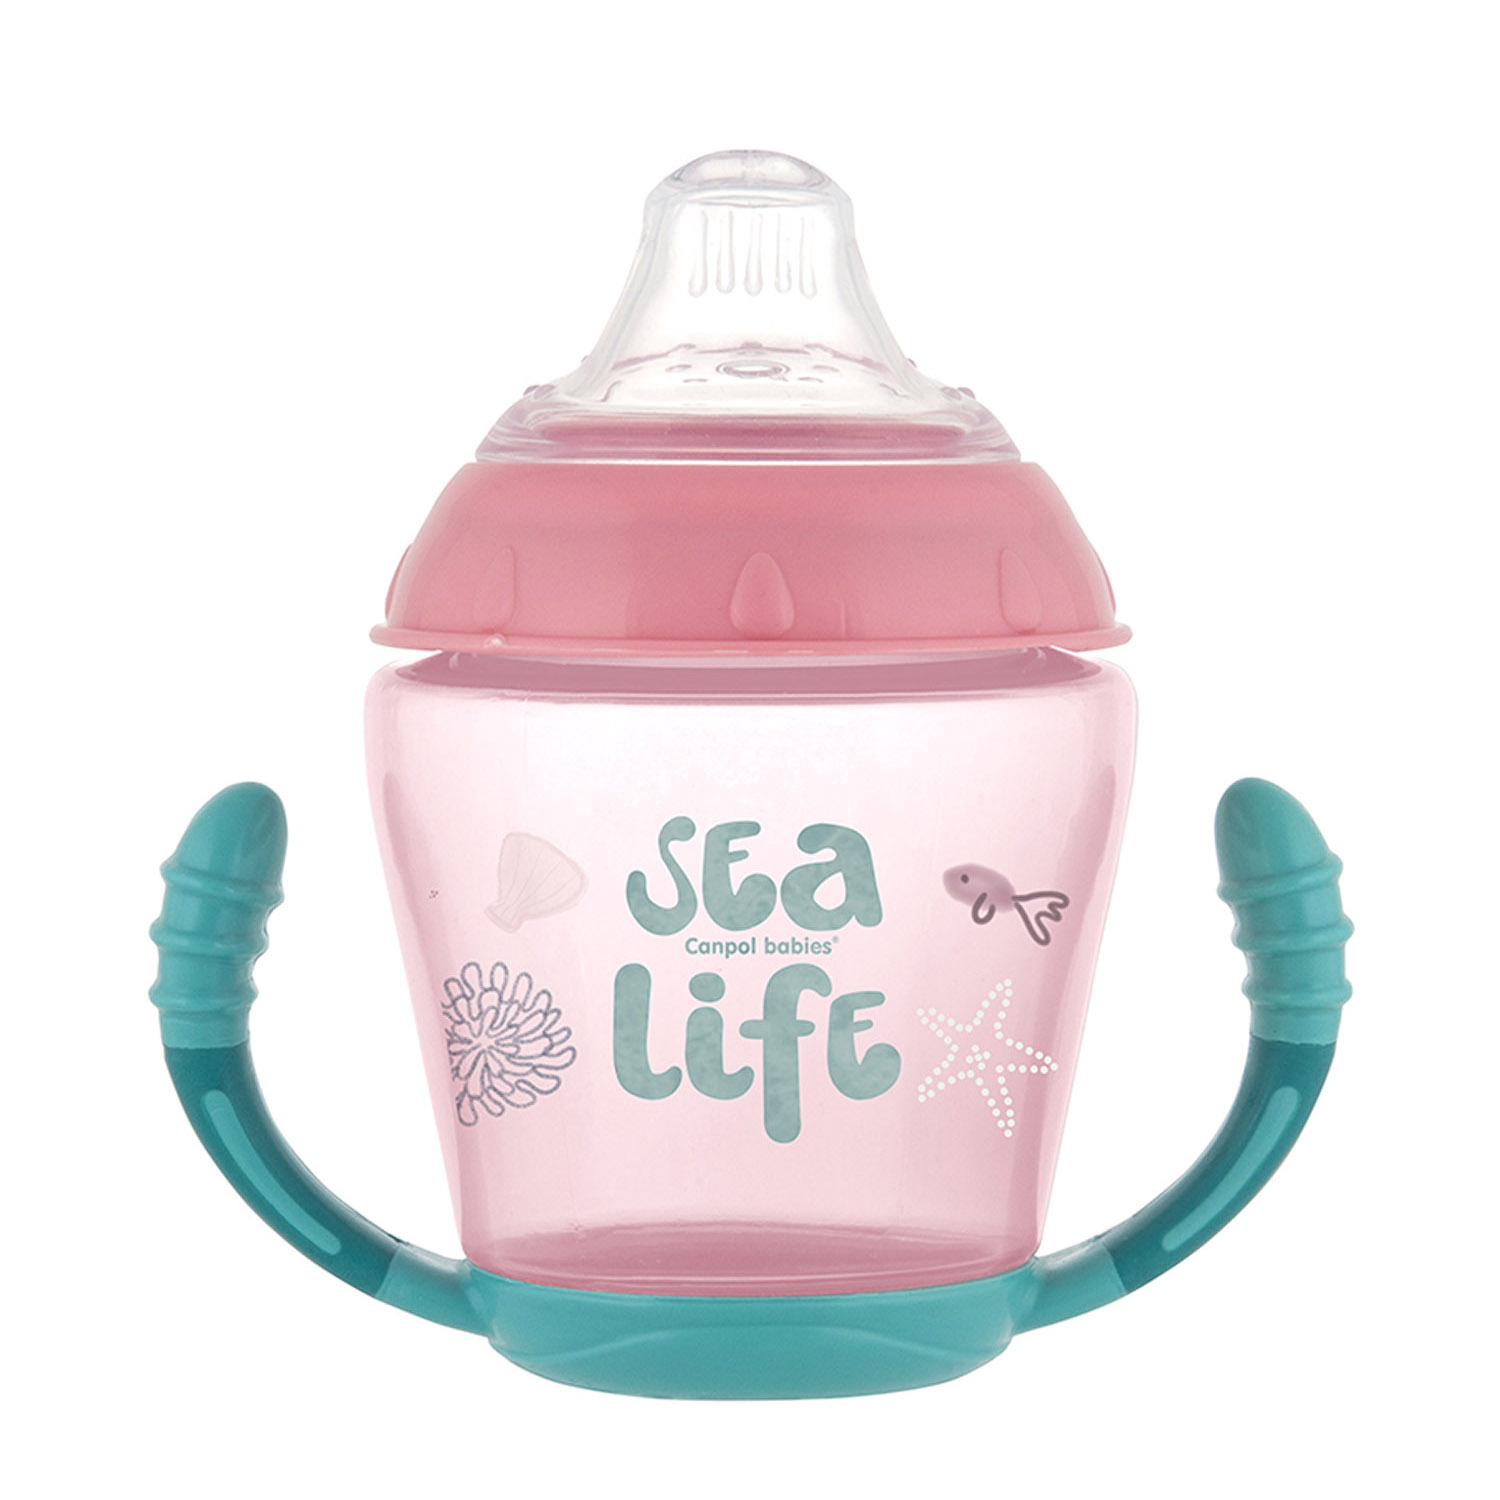 https://canpolbabies.com/eCatalog/canpol/eating-and-drinking/cups-and-sport-cups/56-501_pin/56_501_pin_item_front.jpg